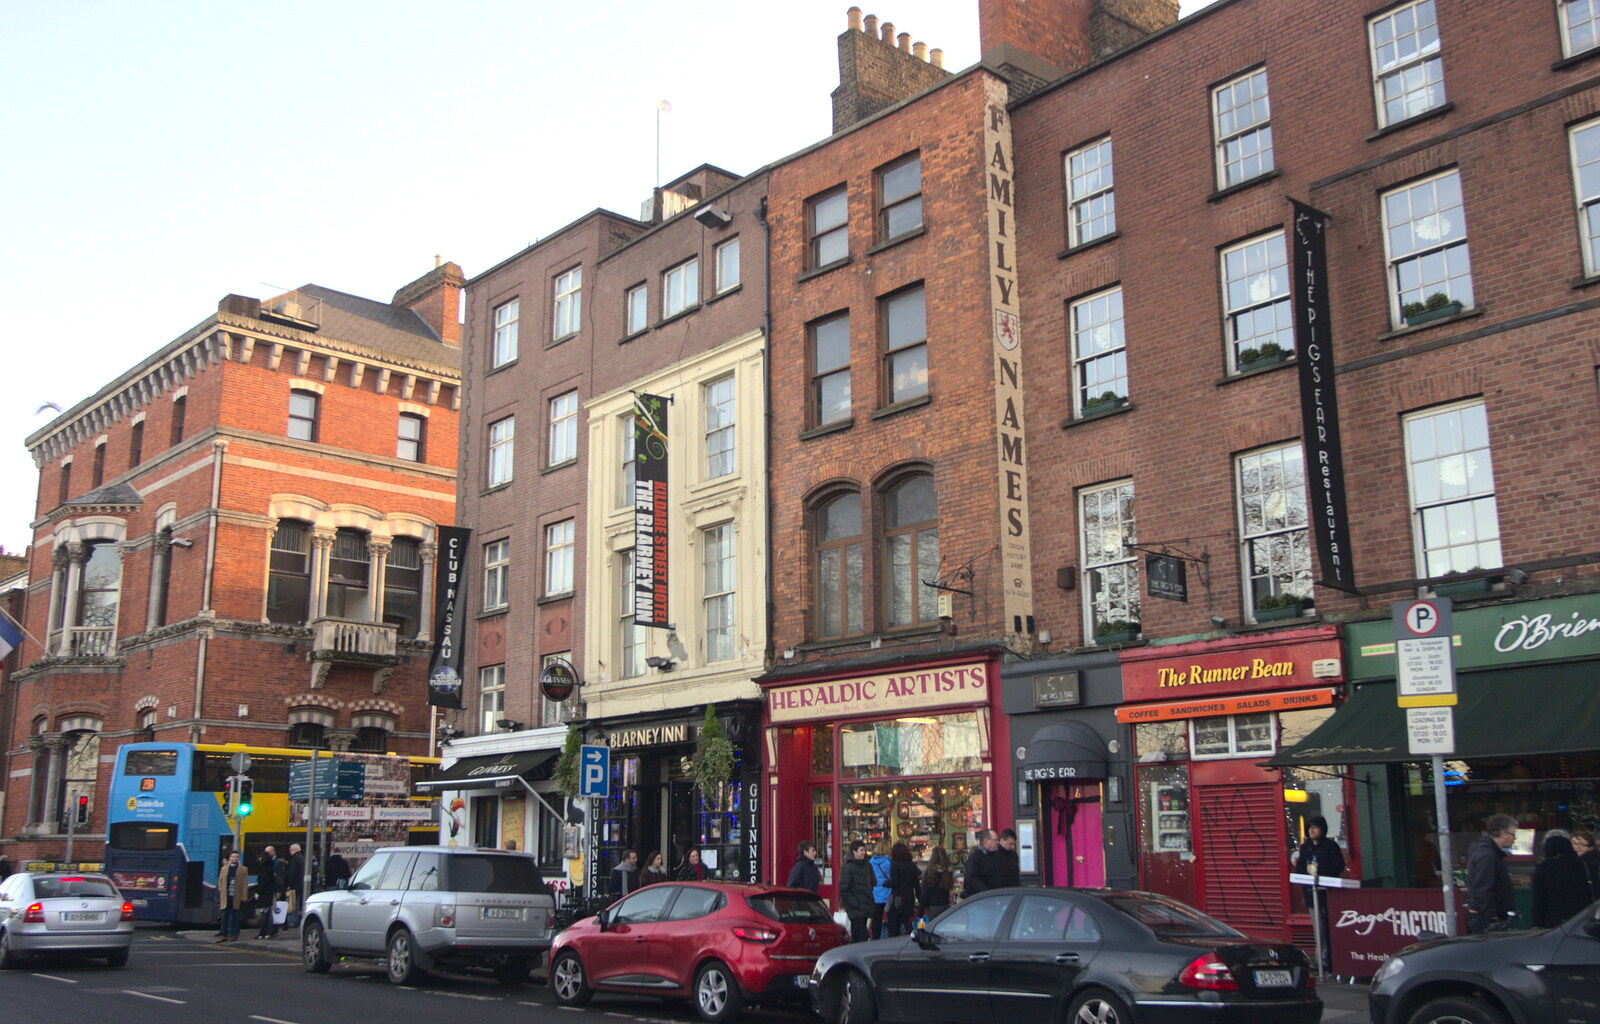 Interesting old buildings from Christmas Eve in Dublin and Blackrock, Ireland - 24th December 2015